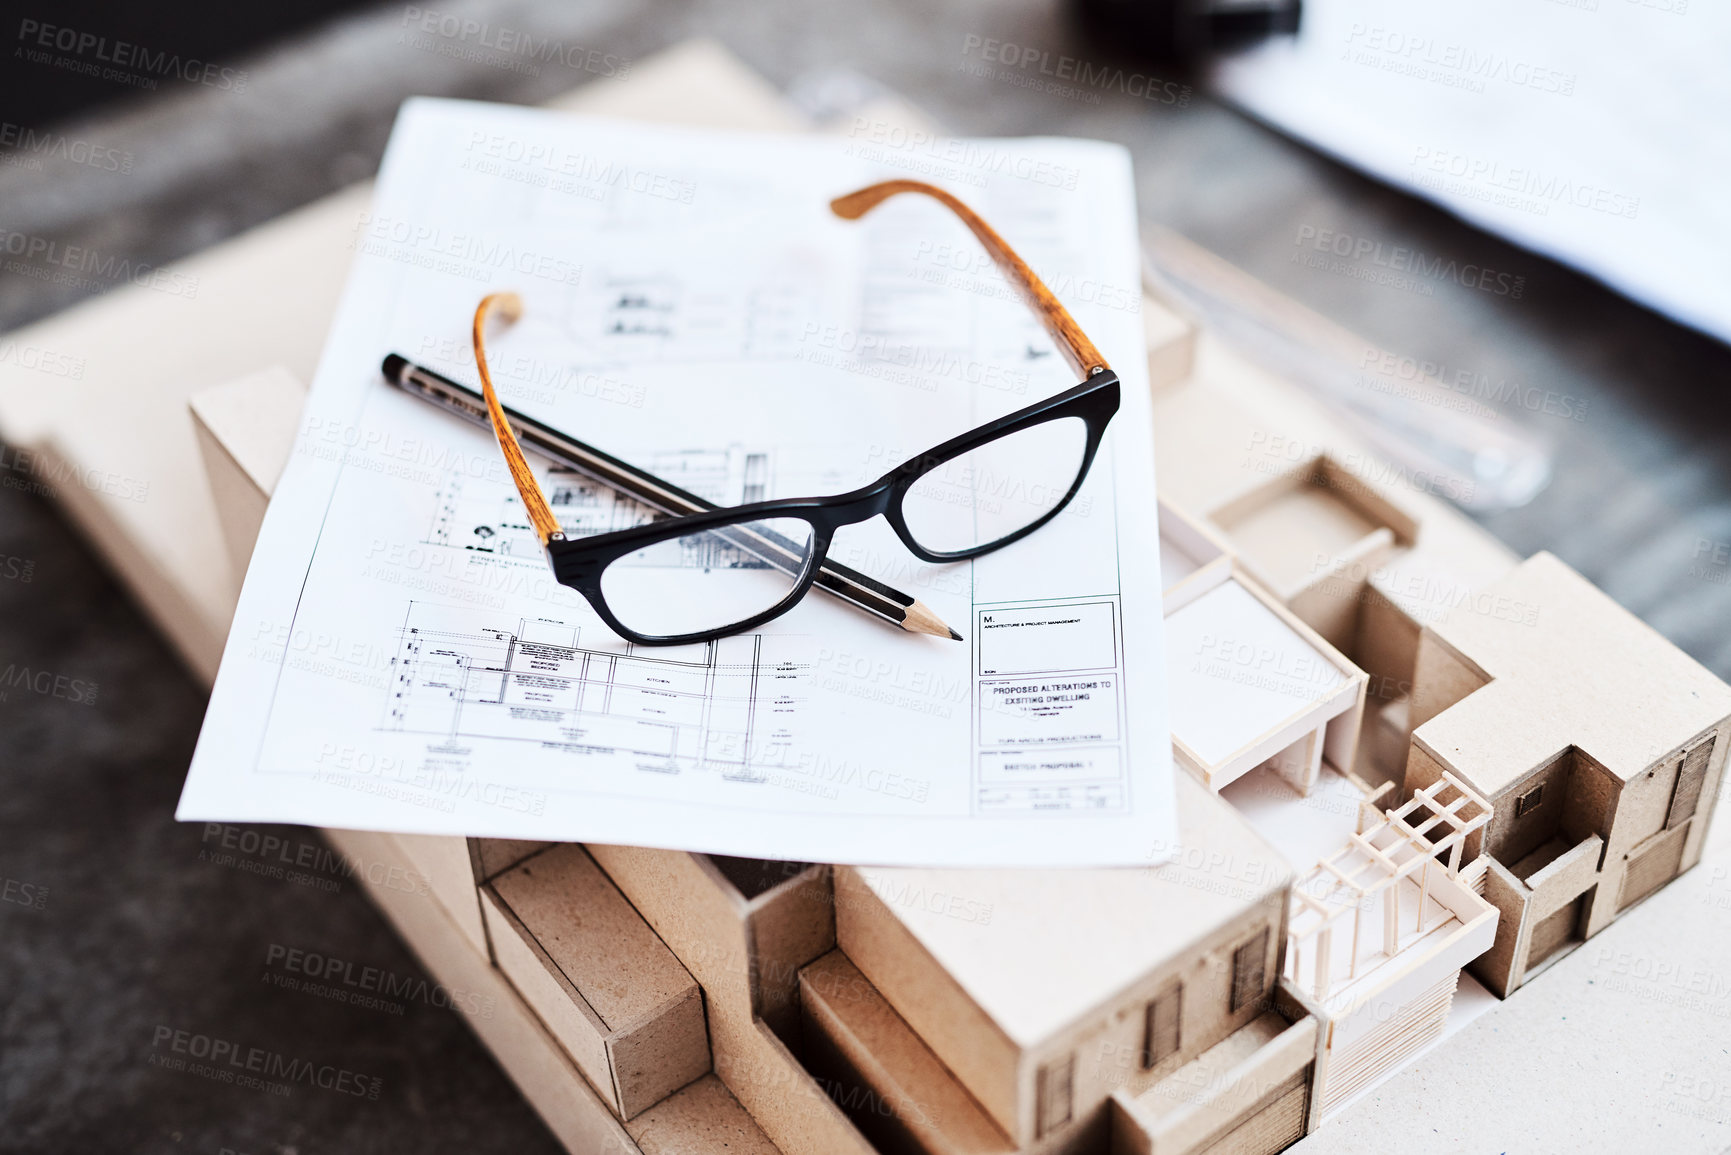 Buy stock photo Shot of glasses, a pencil, blueprint and building model on a desk in an office